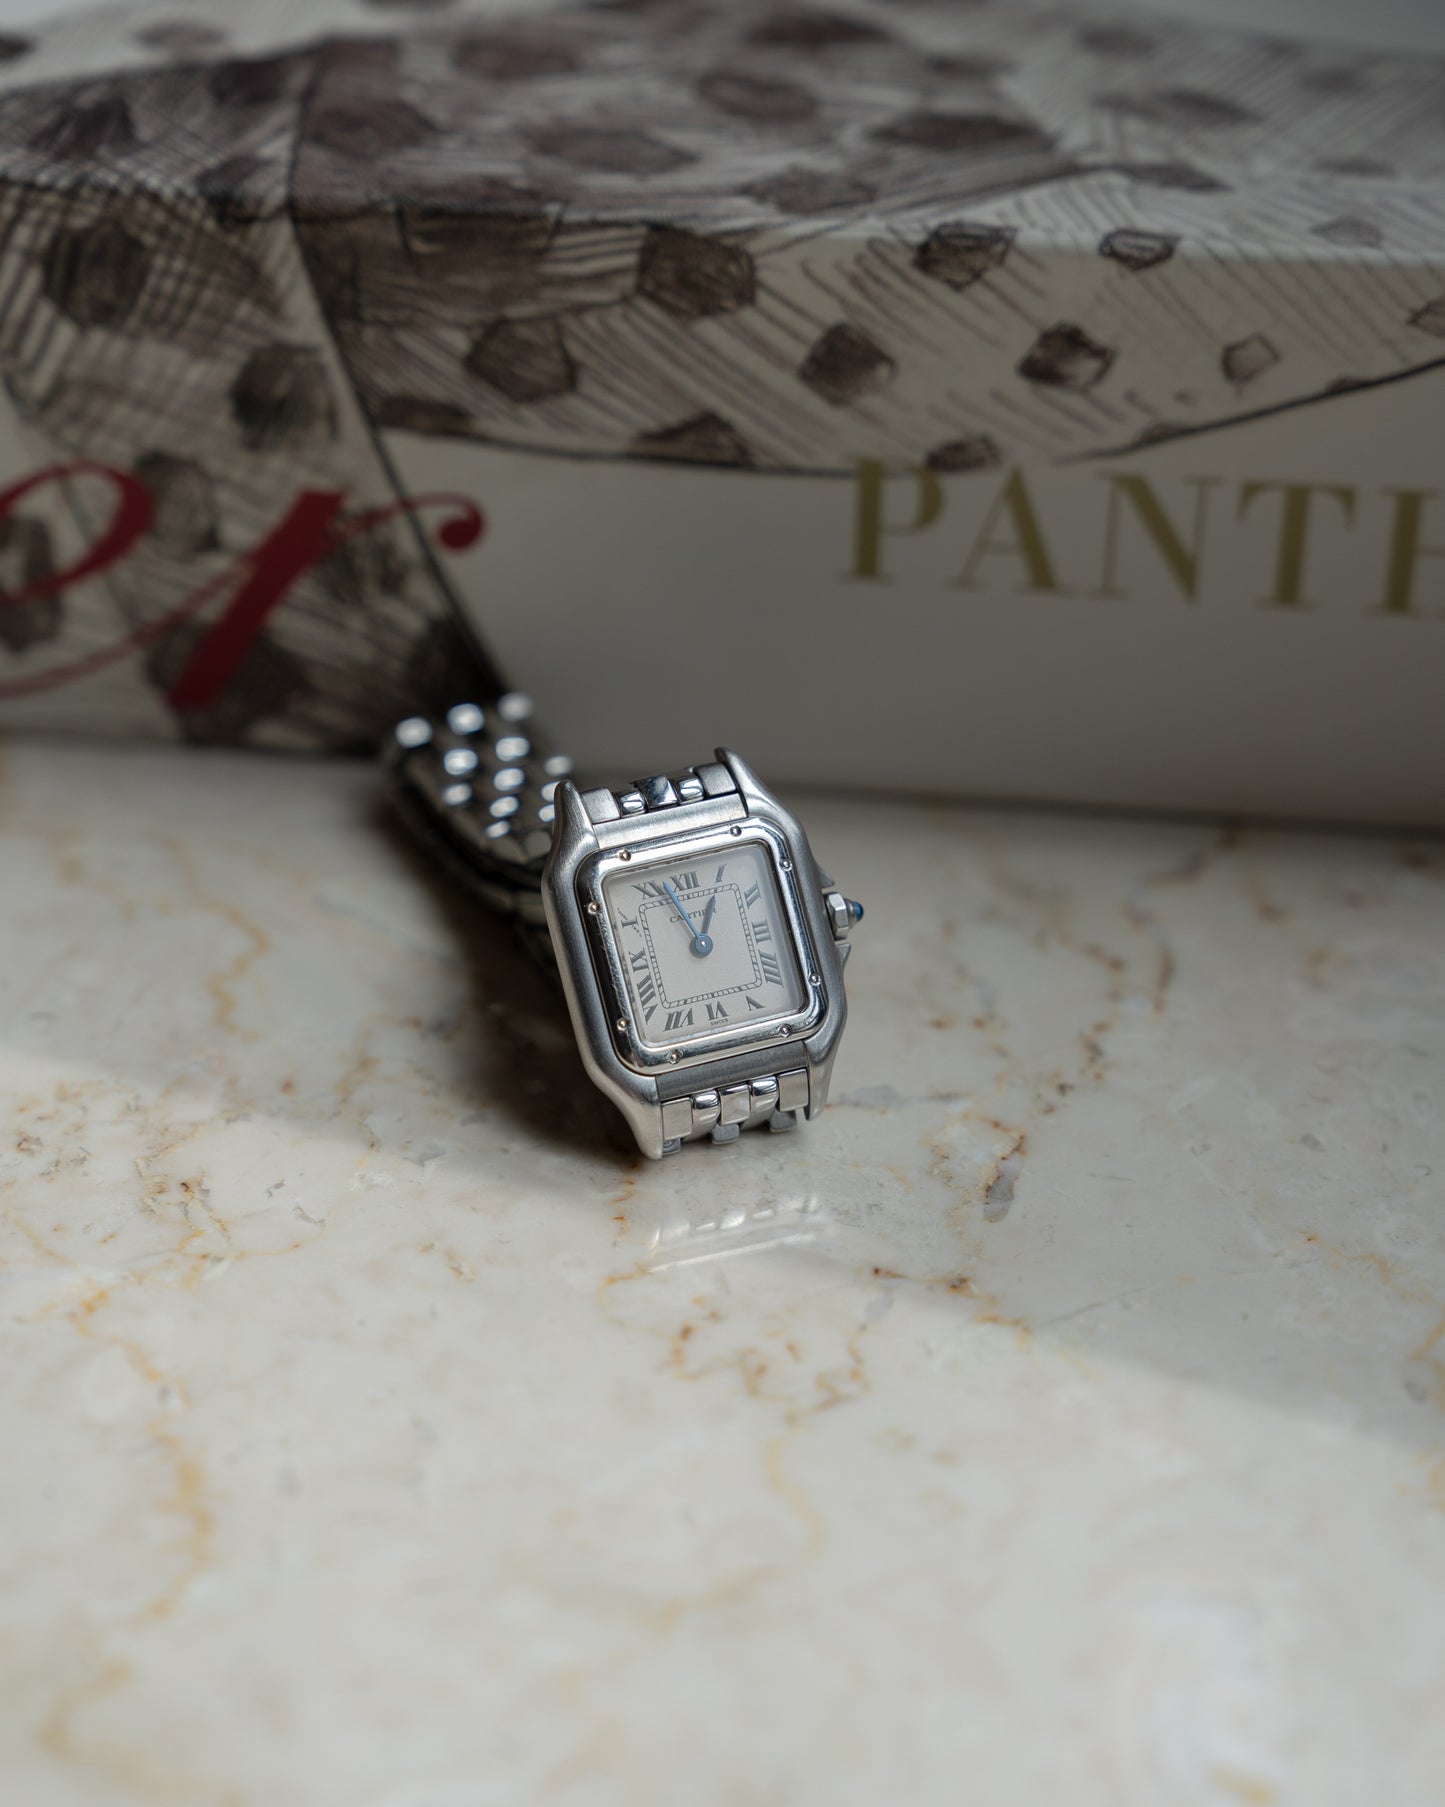 Cartier Panthere SM in steel ref. 1320, box & papers